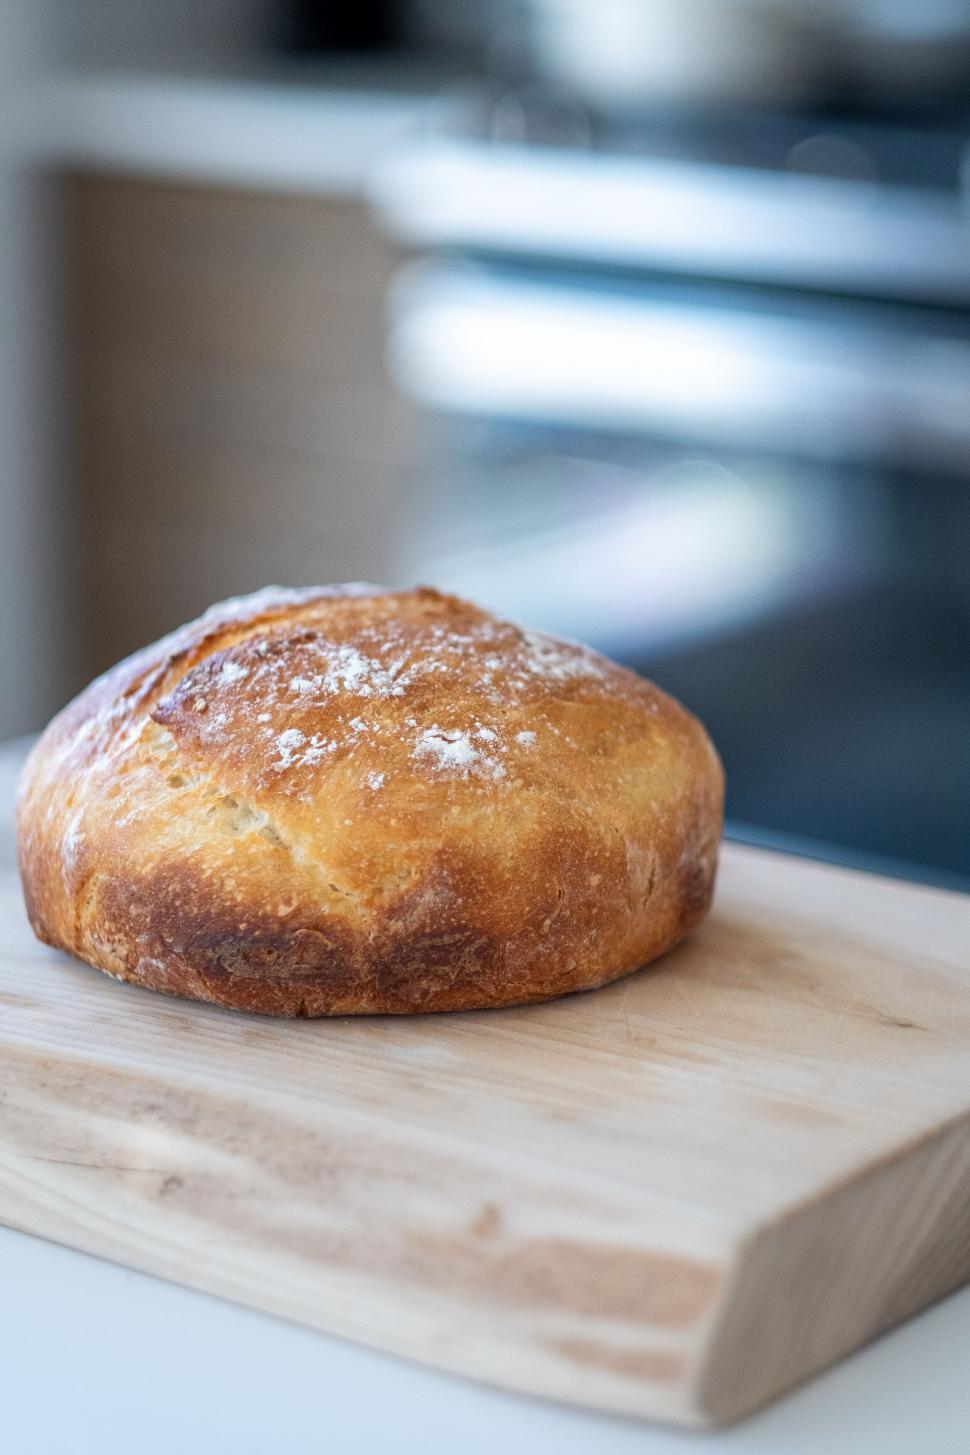 Free Image of Freshly baked artisan bread on a cutting board 